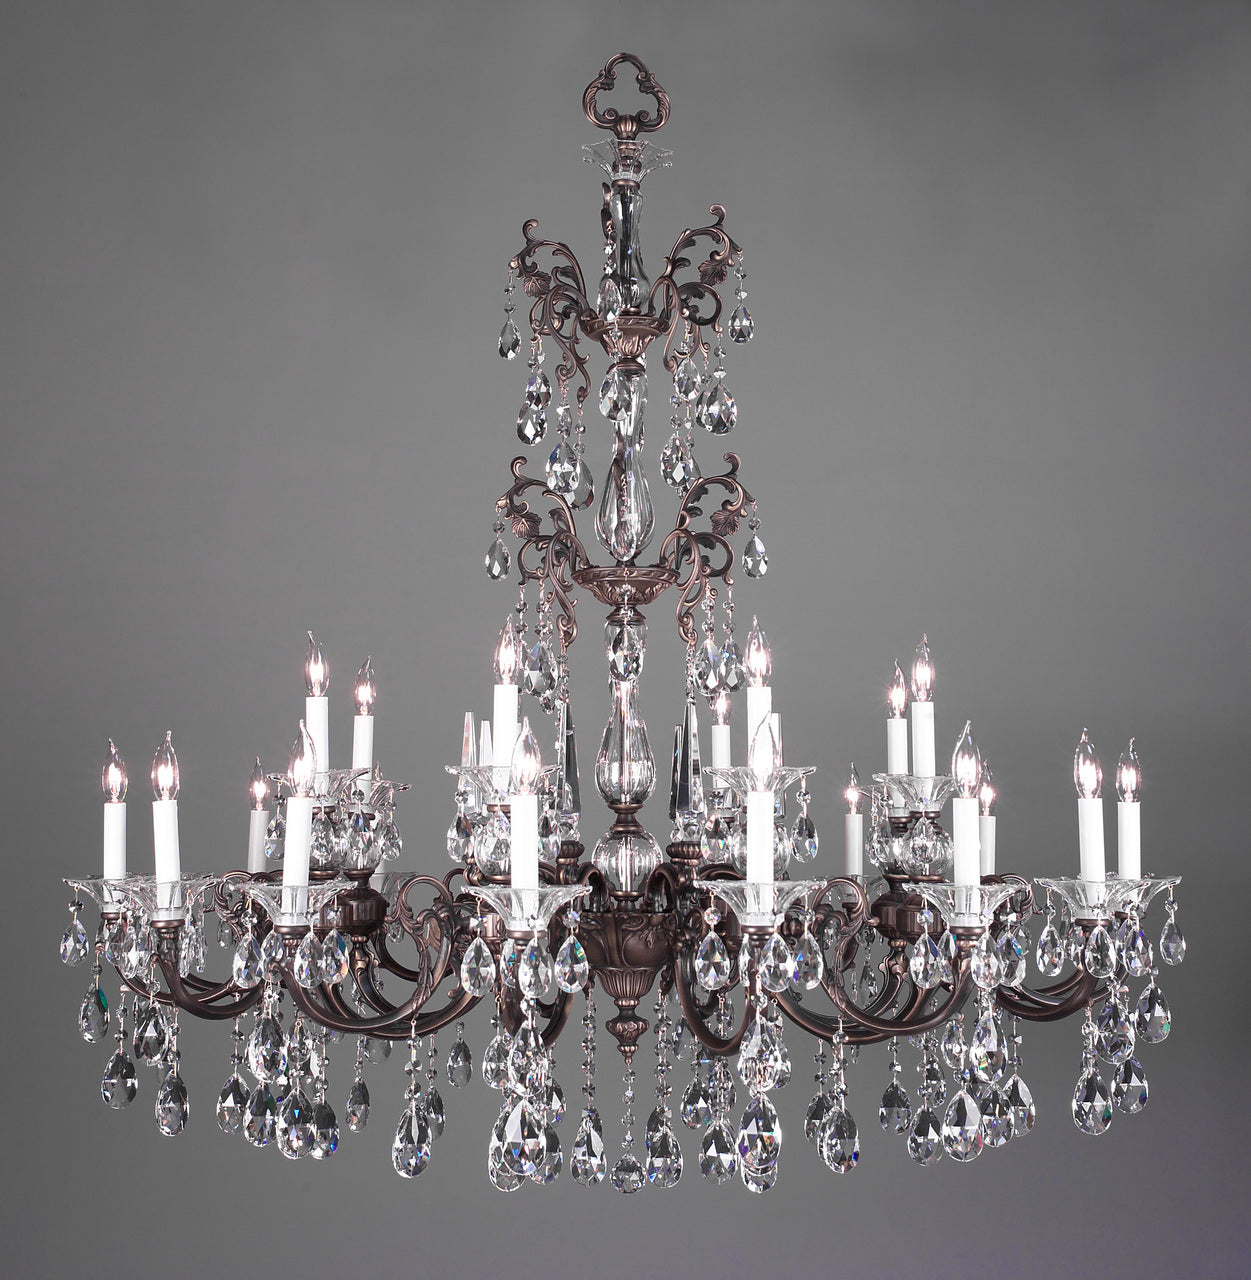 Classic Lighting 57065 SS CGT Via Lombardi Crystal Chandelier in Silverstone (Imported from Spain)